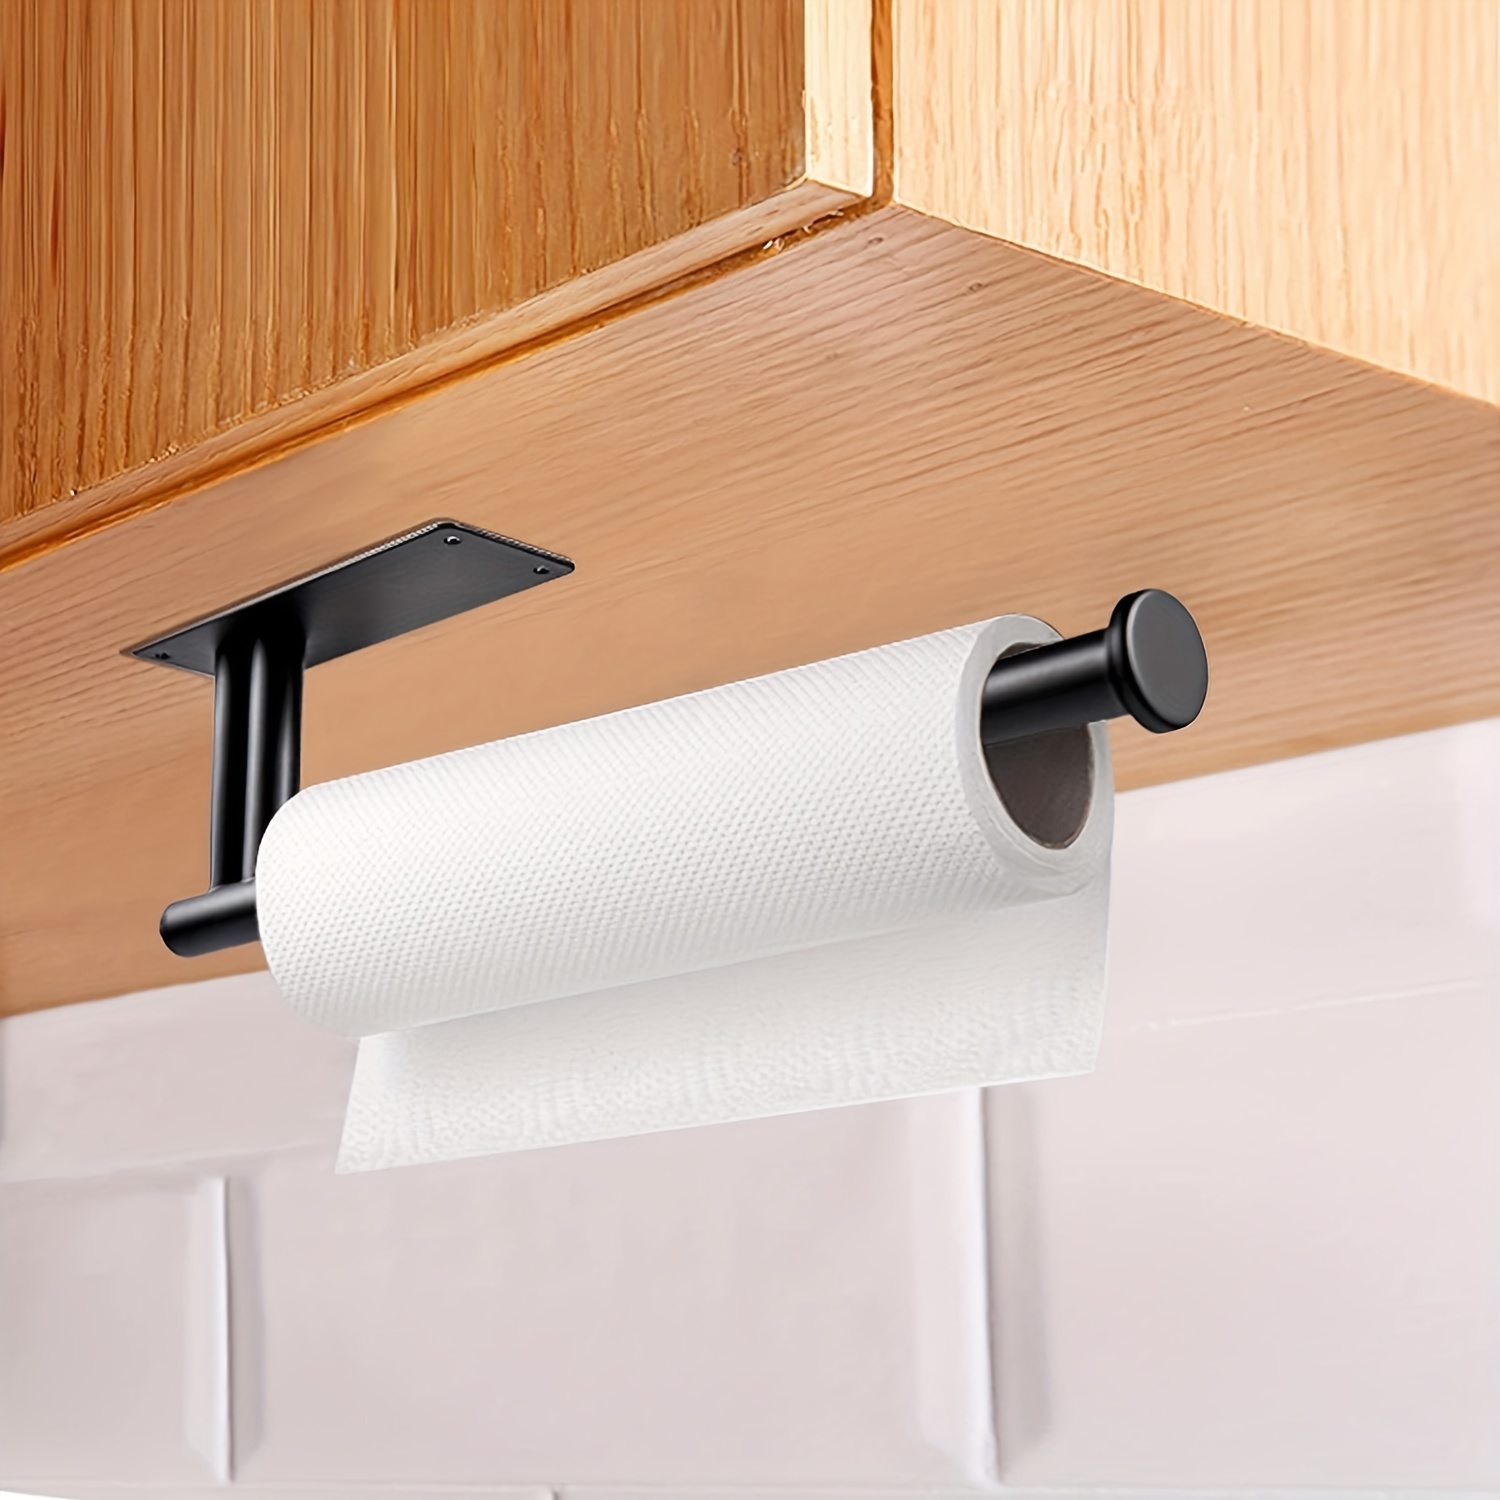 Paper Towel Holder Under Cabinet, Self Adhesive Wall Mount Paper Towel  Holder, SUS304 Stainless Steel Under Cupboard Paper Towel Holder for  Kitchen